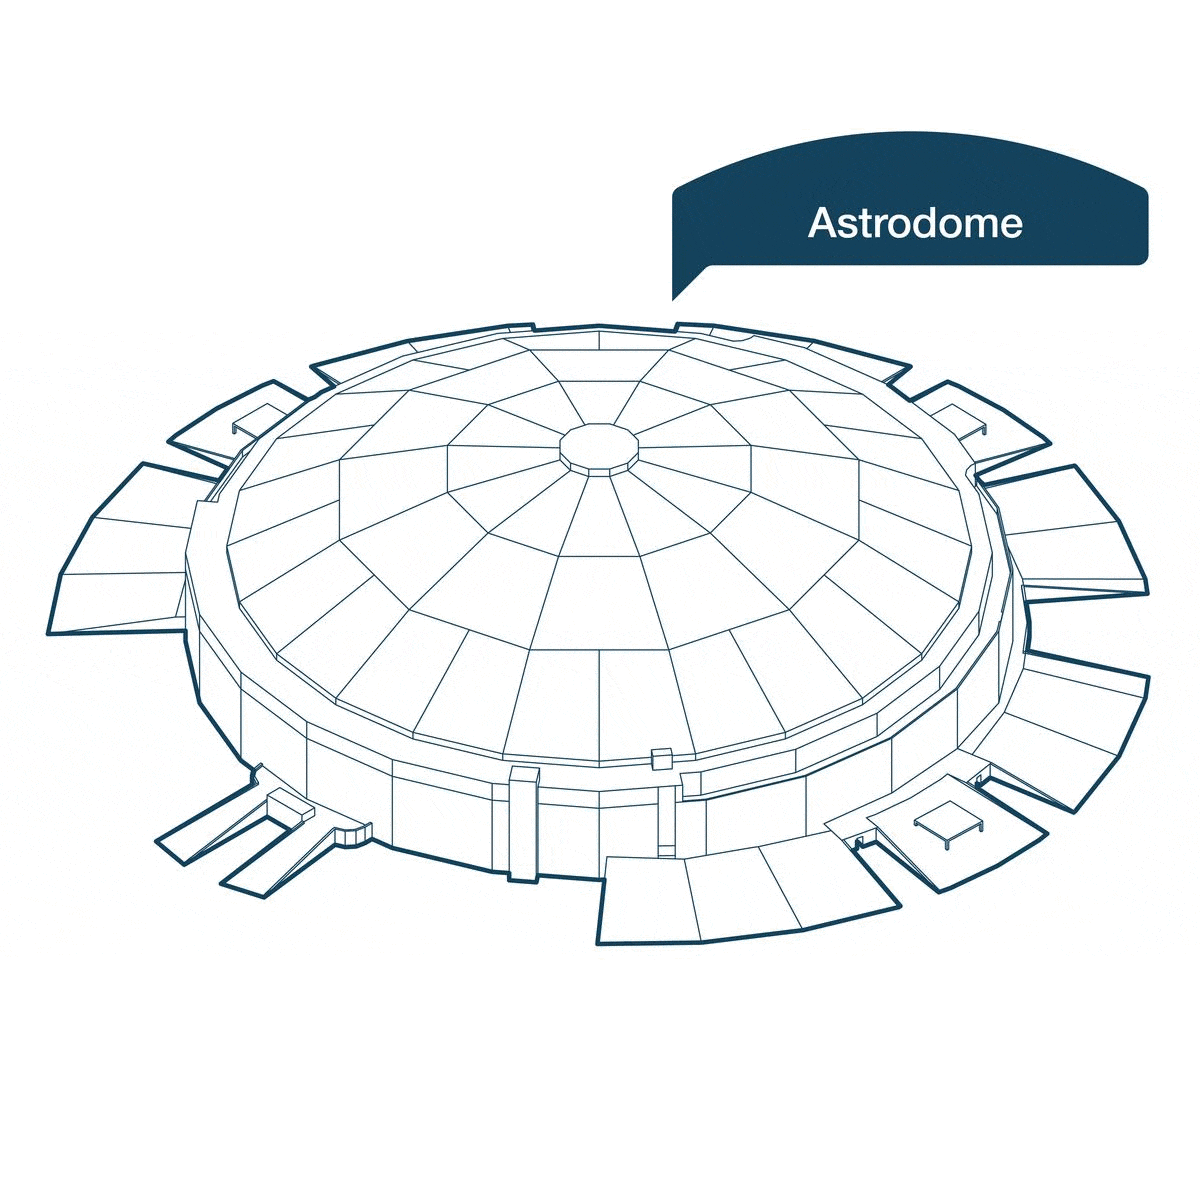 History of the Astrodome